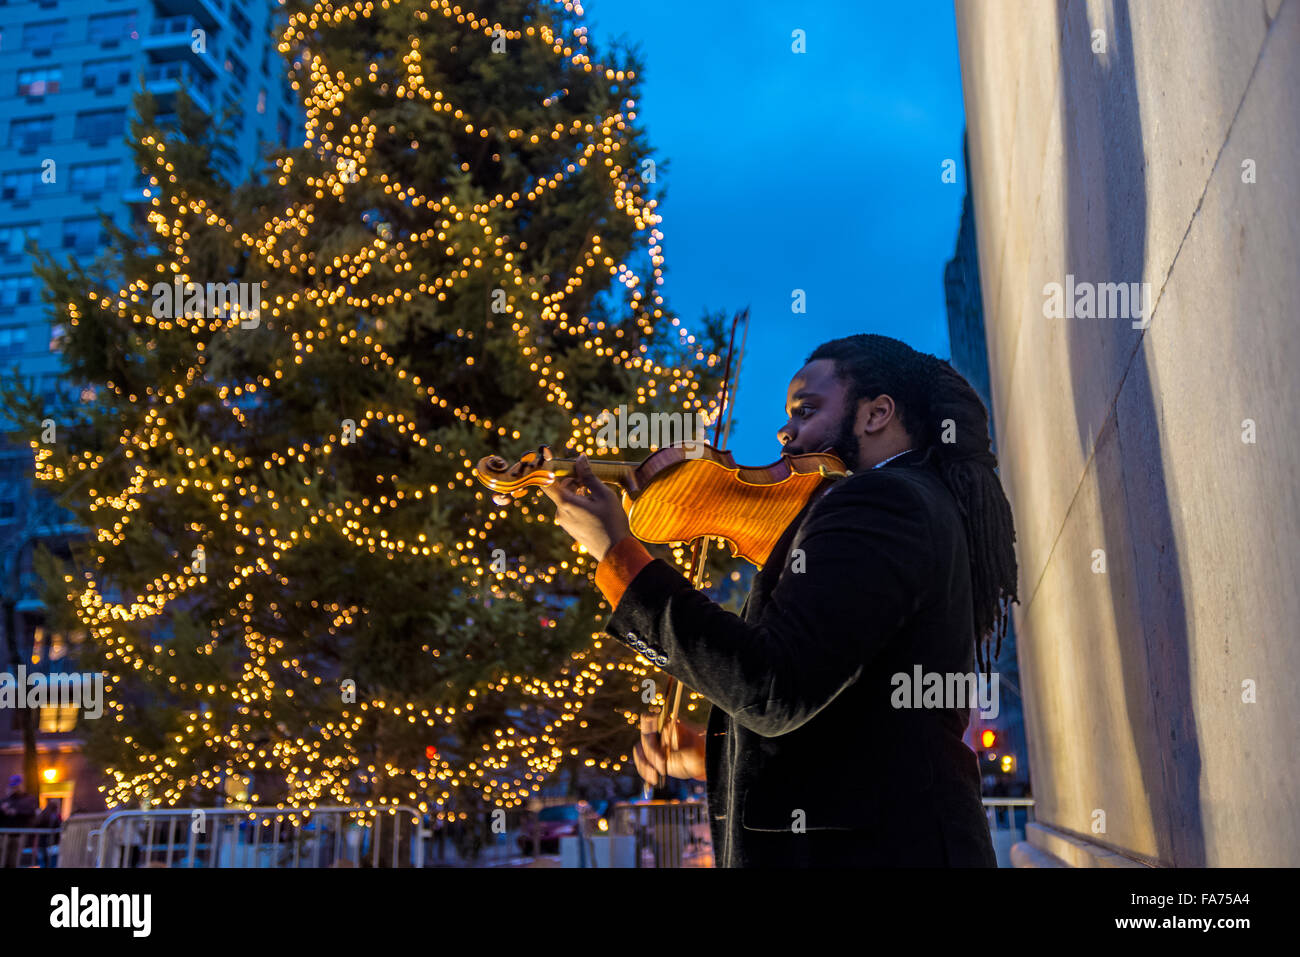 New York, NY 22 December 2015 - Violinist playing Christmas music under the arch in Washington Square Park ©Stacy Walsh Rosenstock/Alamy Stock Photo